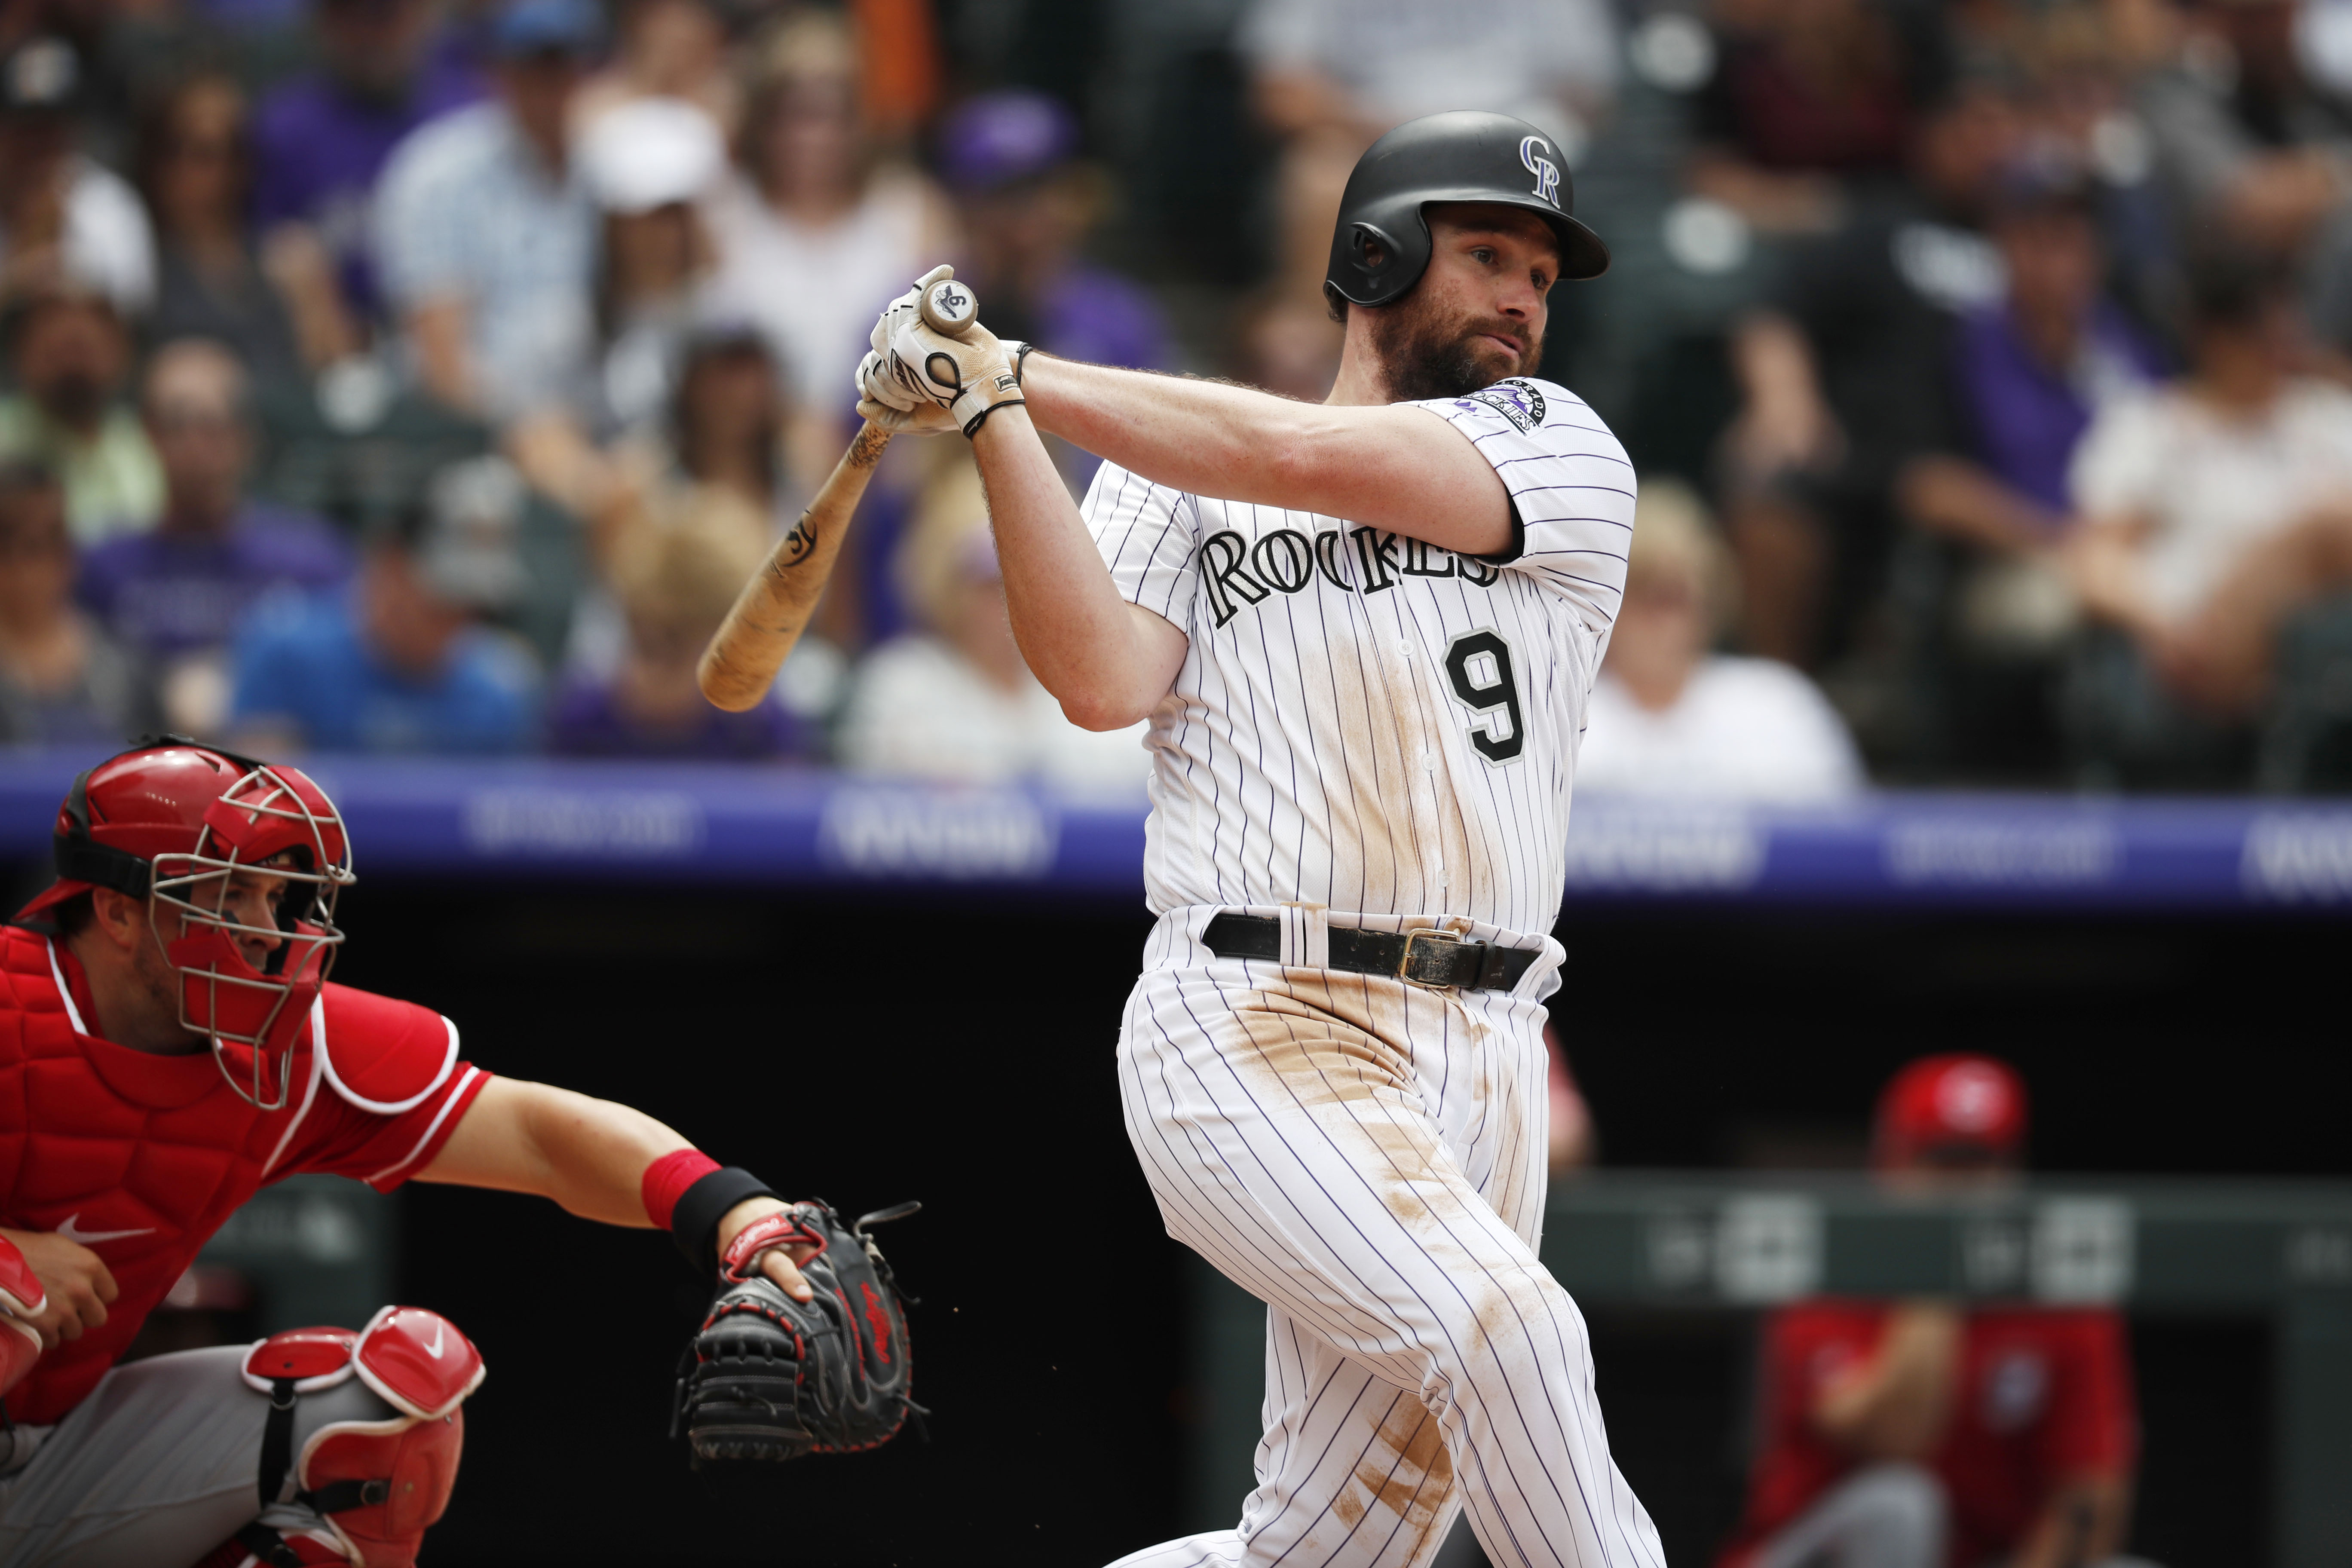 McMahon leads offensive show, Rockies beat Reds 10-9